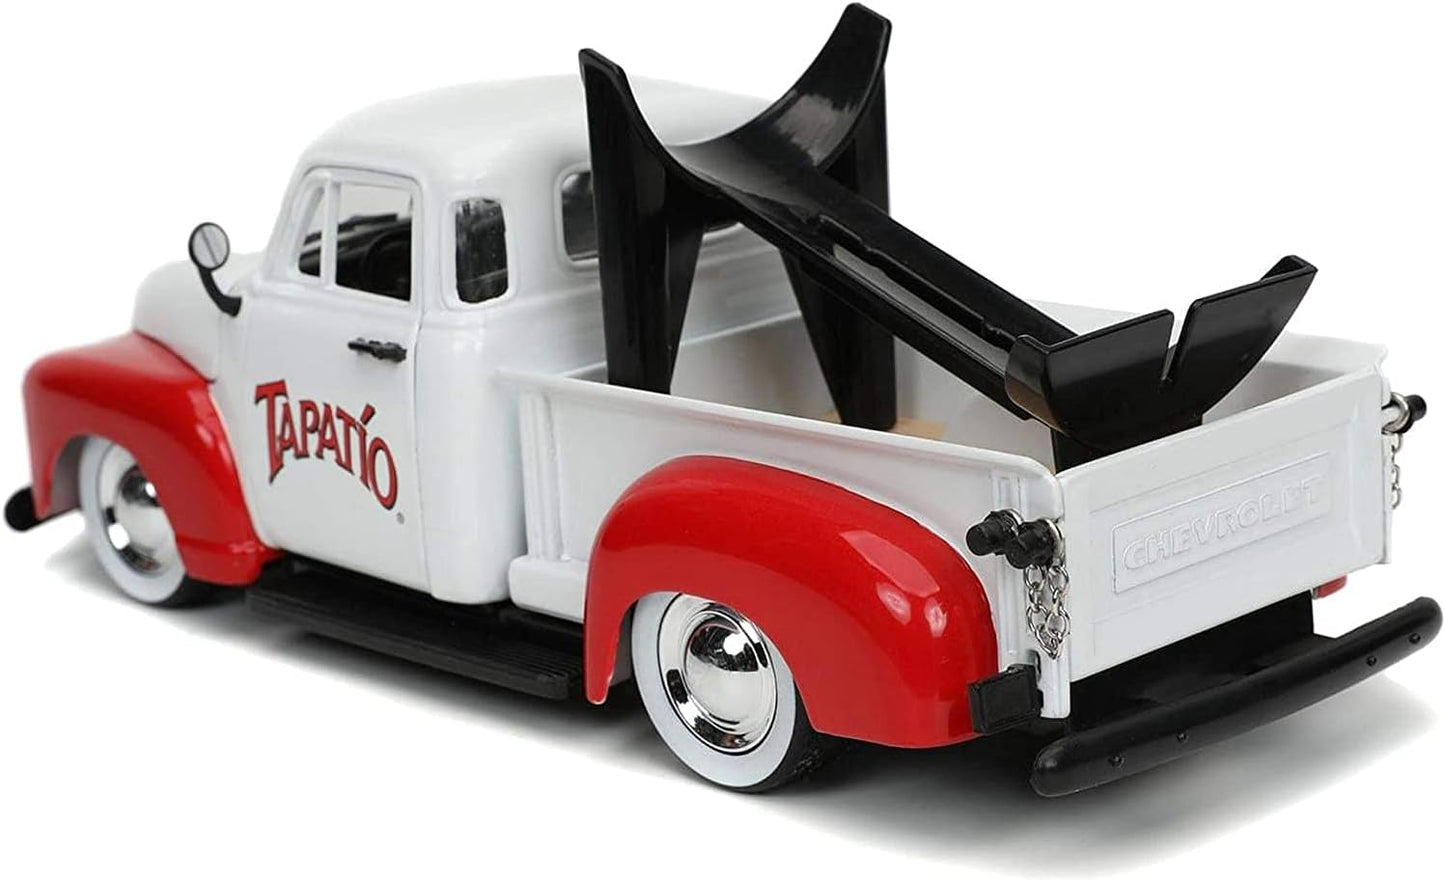 Jada 1:24 Diecast 1953 Chevy Pickup with Tapatio Bottle Holder &Figure